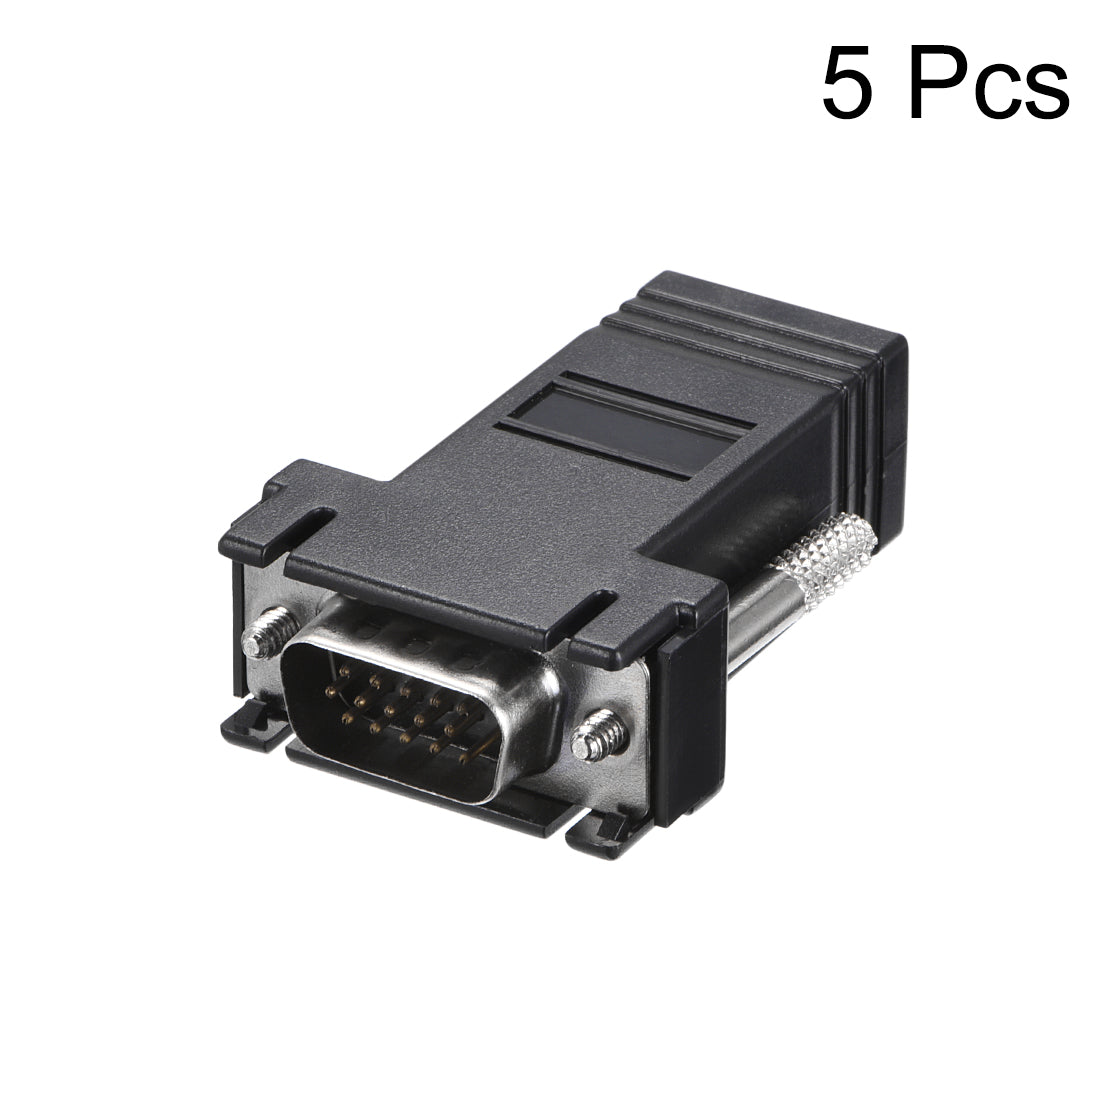 uxcell Uxcell RJ45 to VGA Extender Adapter RJ45 Female Enternet to DB15 Male Port for Multimedia Video Black 5pcs